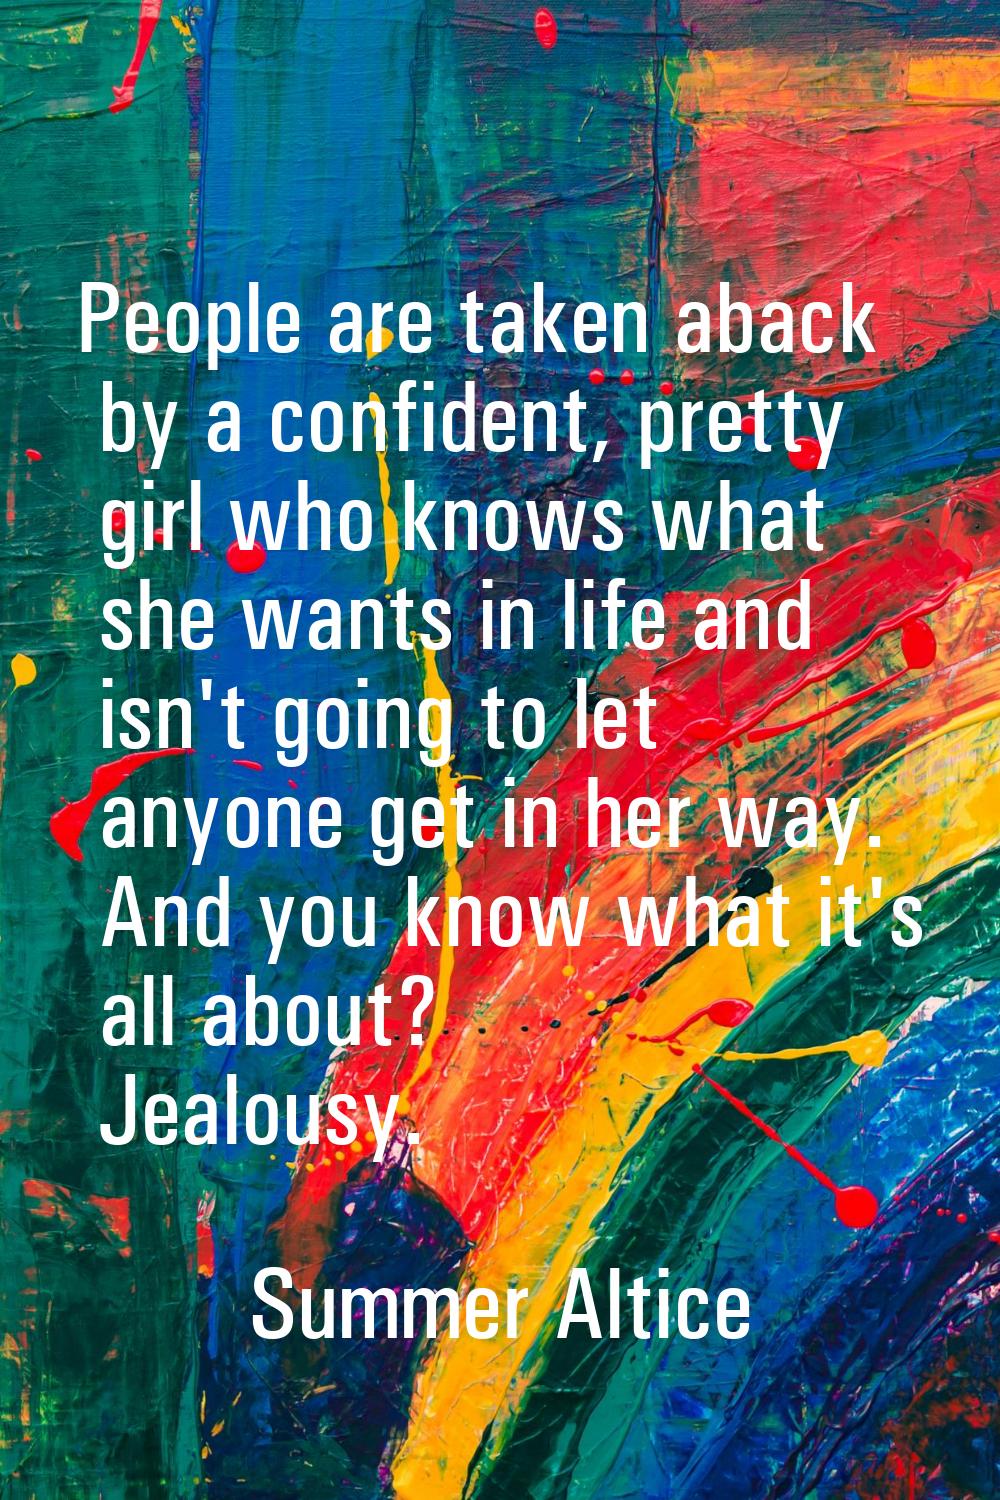 People are taken aback by a confident, pretty girl who knows what she wants in life and isn't going